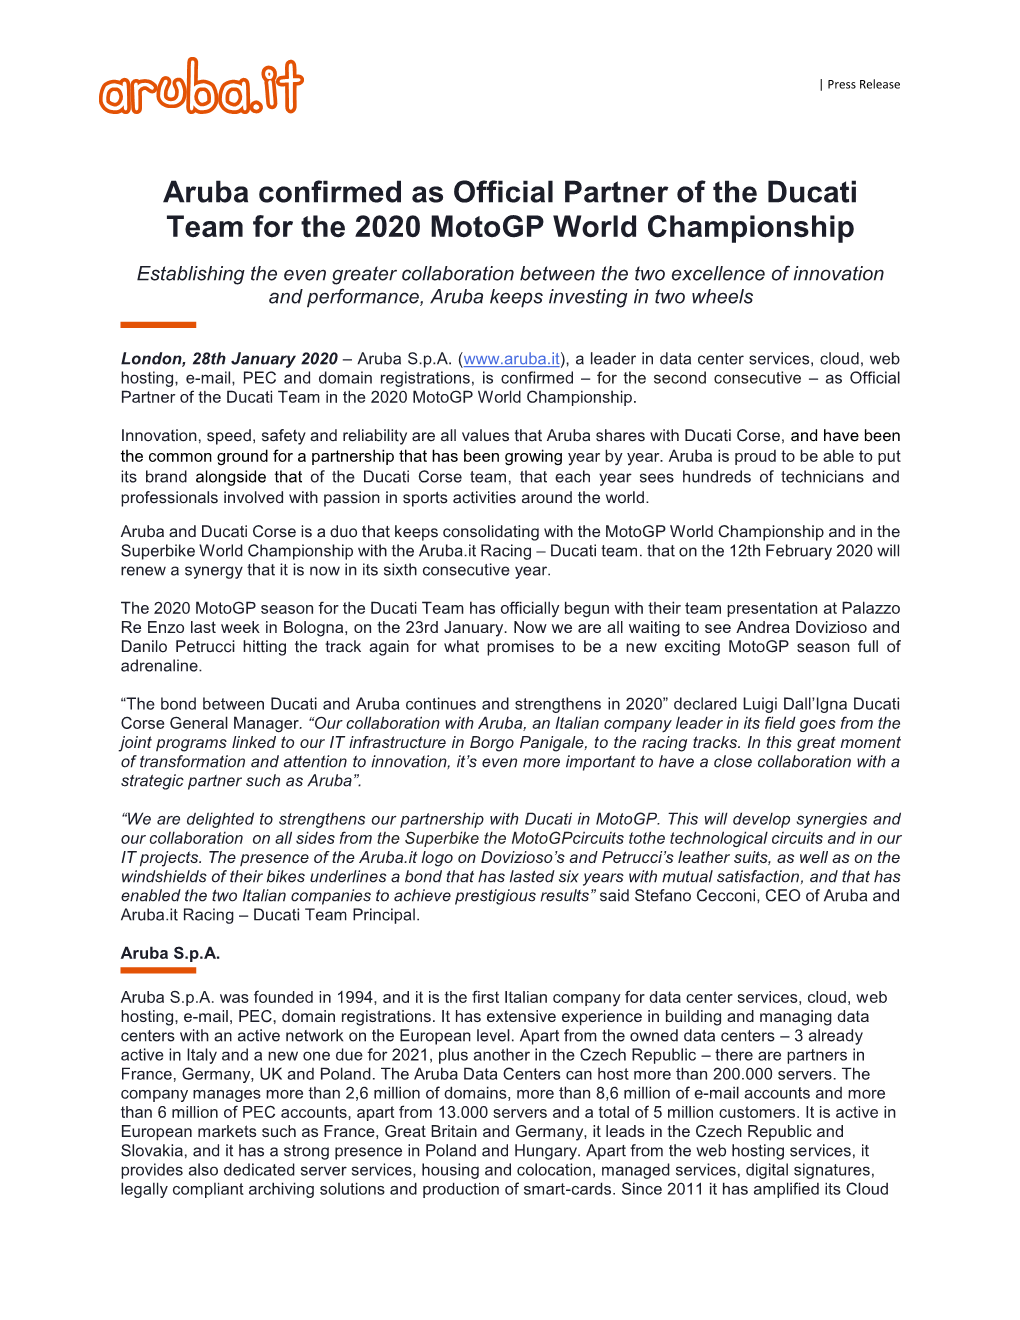 Aruba Confirmed As Official Partner of the Ducati Team for the 2020 Motogp World Championship